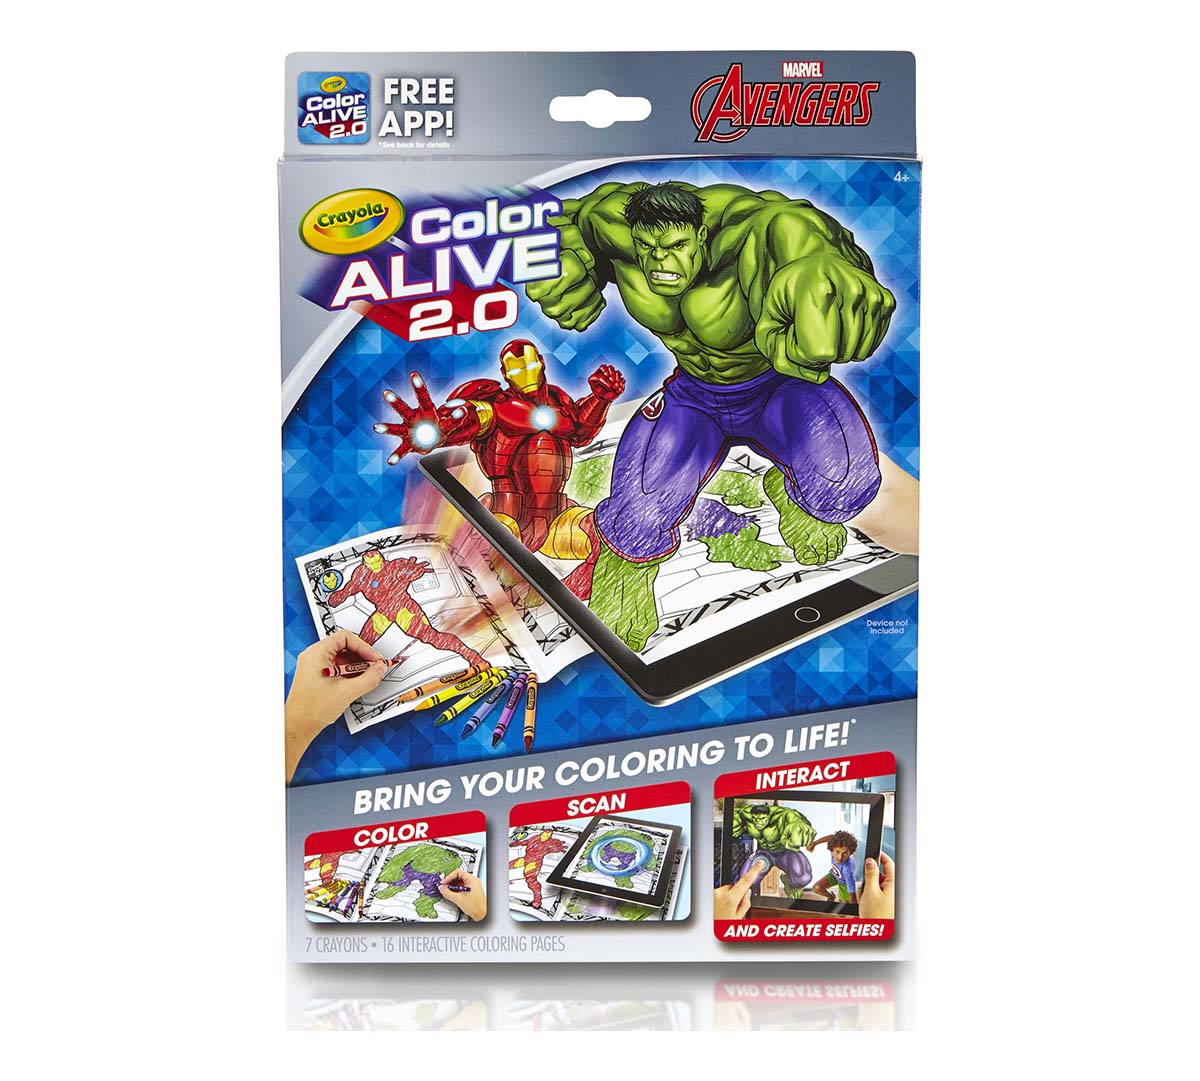 Crayola, Avengers, Color Alive 220.20, Interactive Coloring Pages, Augmented  Reality, Art Tools, Coloring Pages, Crayons, Free App Included   Crayola